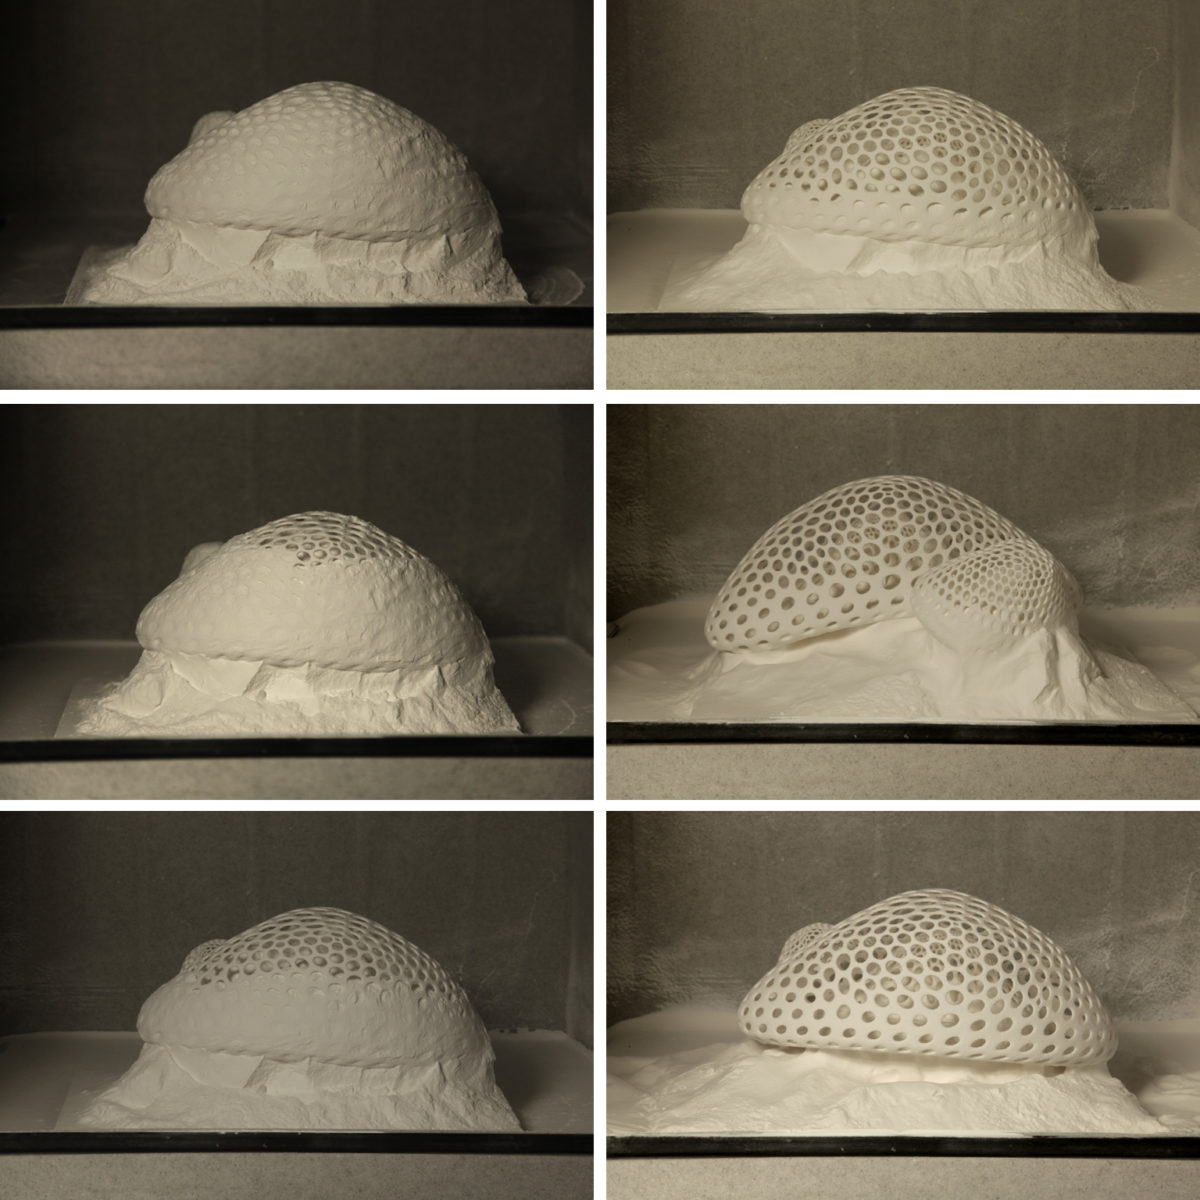 Overcast - Guan Lee, Mamou-Mani - 3D Printed Cloudlets Ceiling Installation - Powder Printing Process